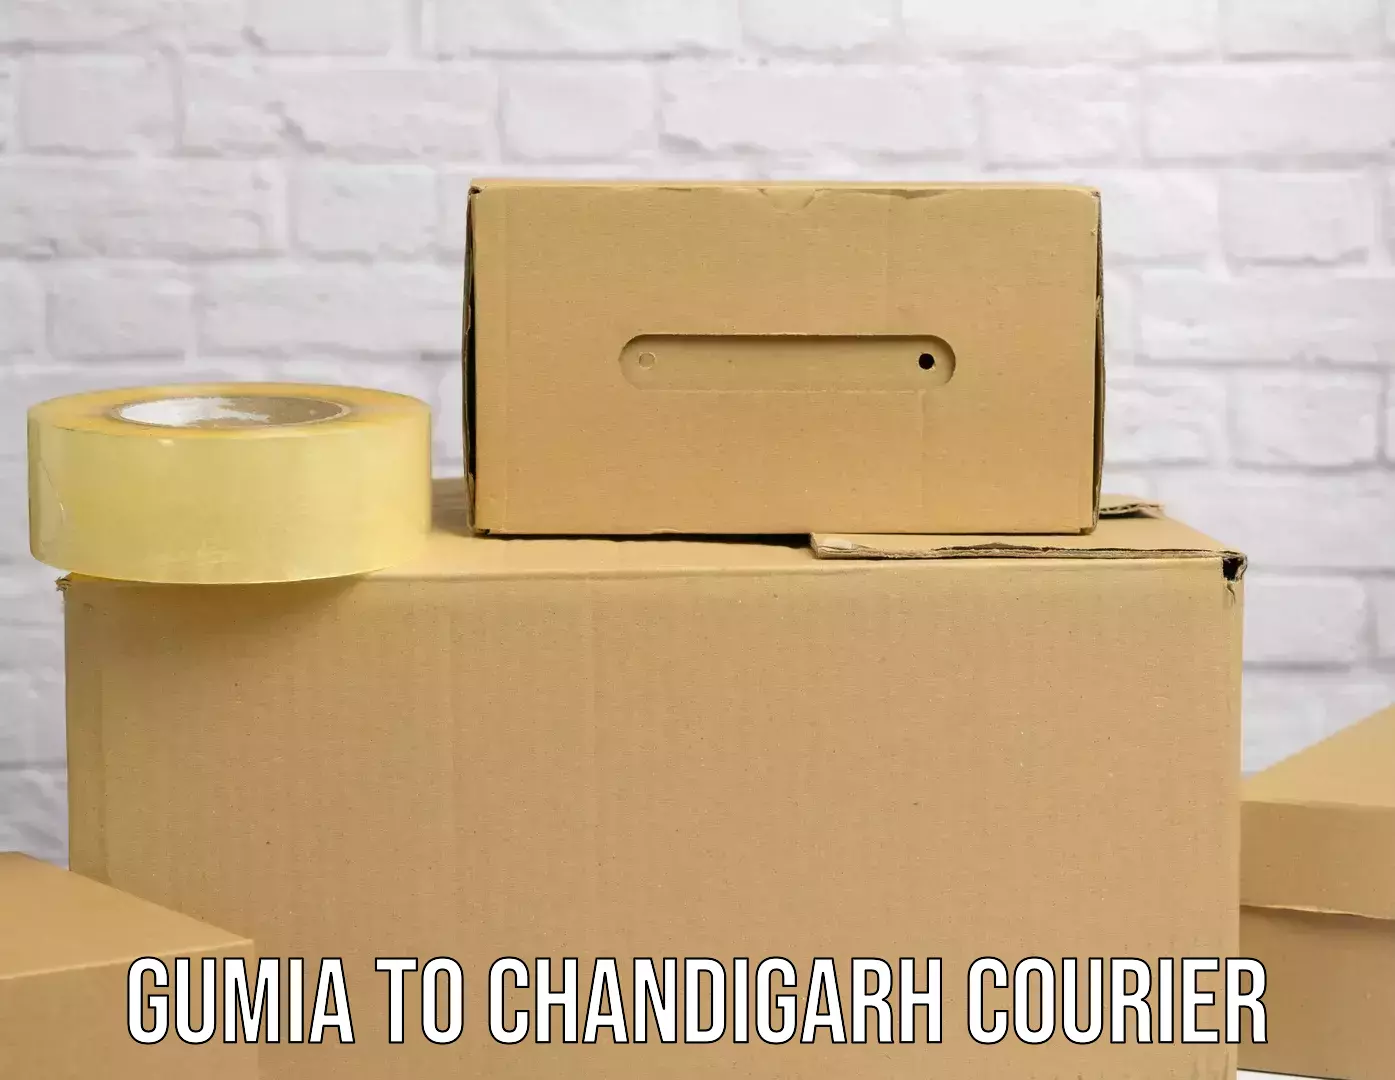 Short distance delivery in Gumia to Chandigarh